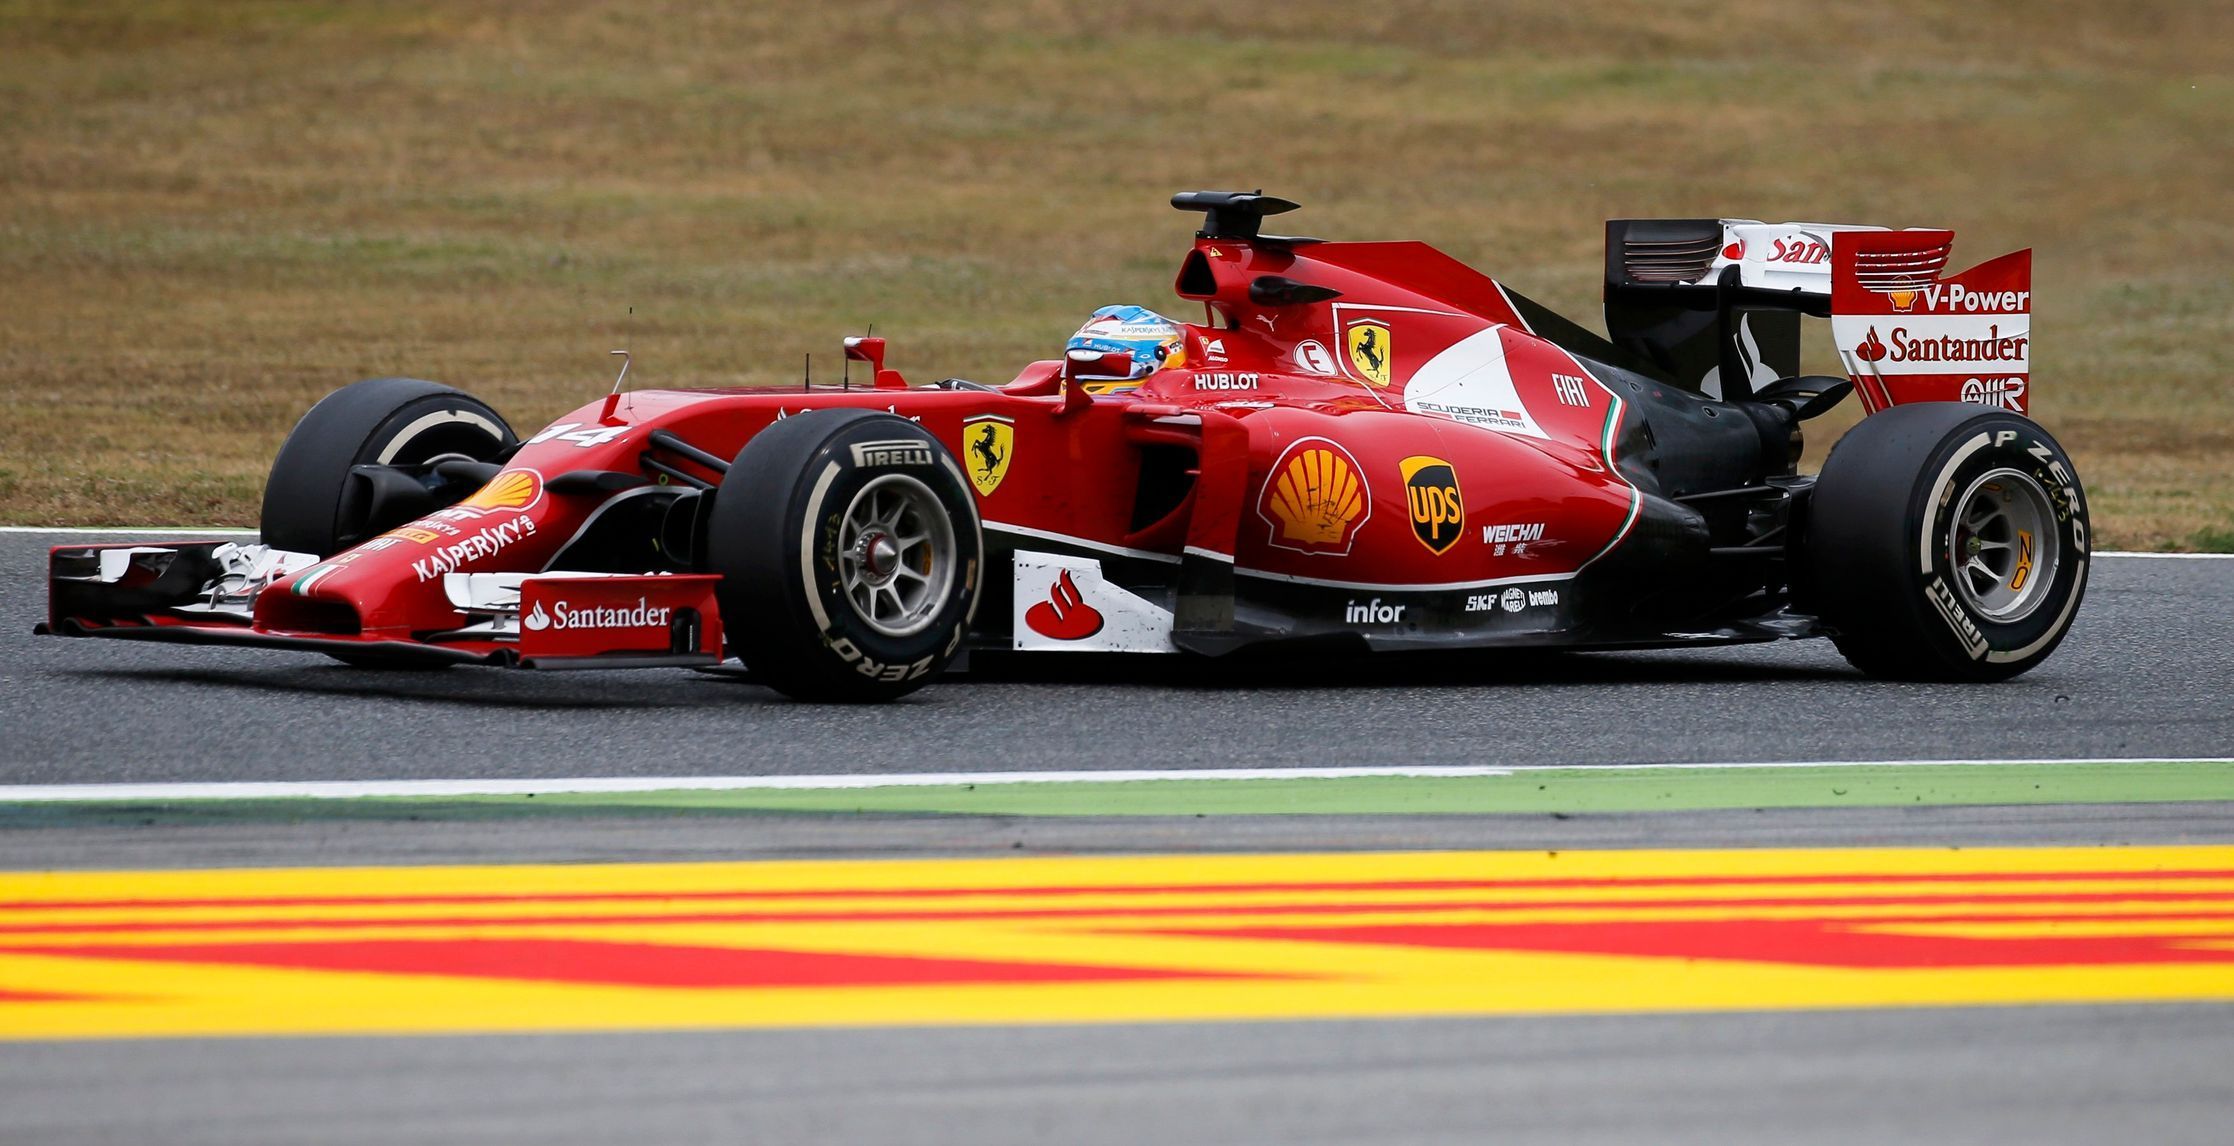 Ferrari Formula One driver Alonso of Spain drives during the Spanish F1 Grand Prix at the Barcelona-Catalunya Circuit in Montmelo